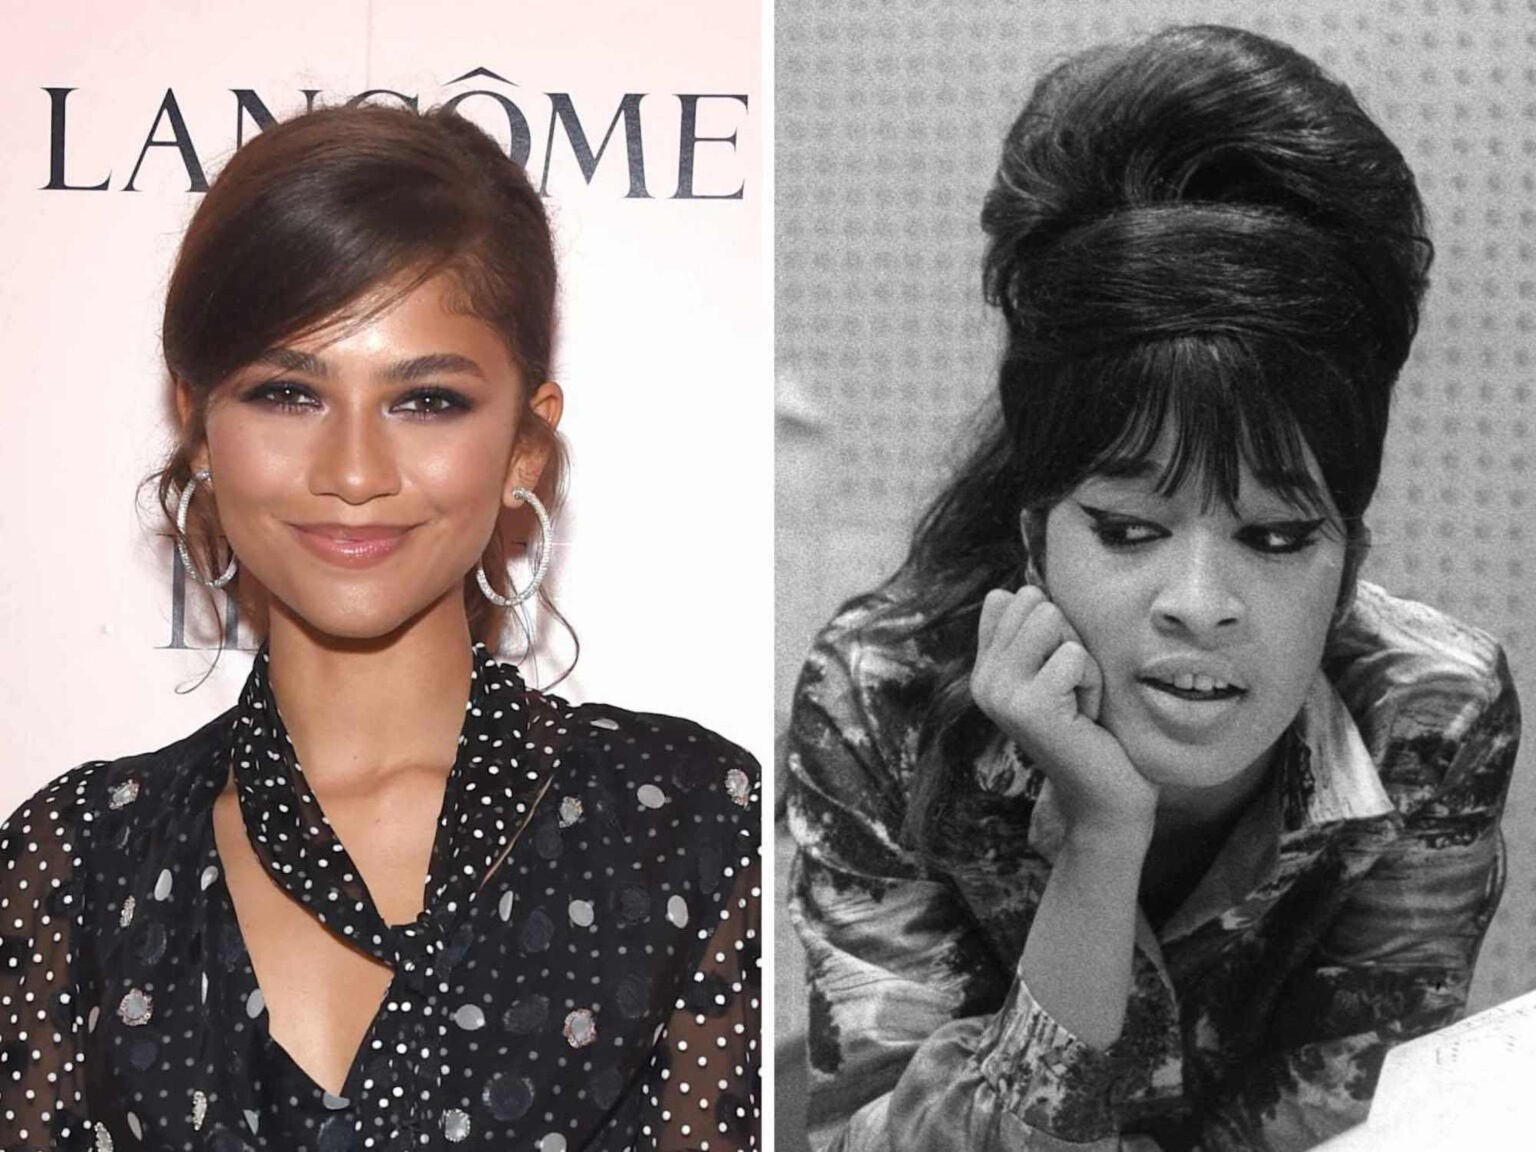 Zendaya has been pegged to play music legend Ronnie Spector of The Ronettes. Discover what's happening with production.